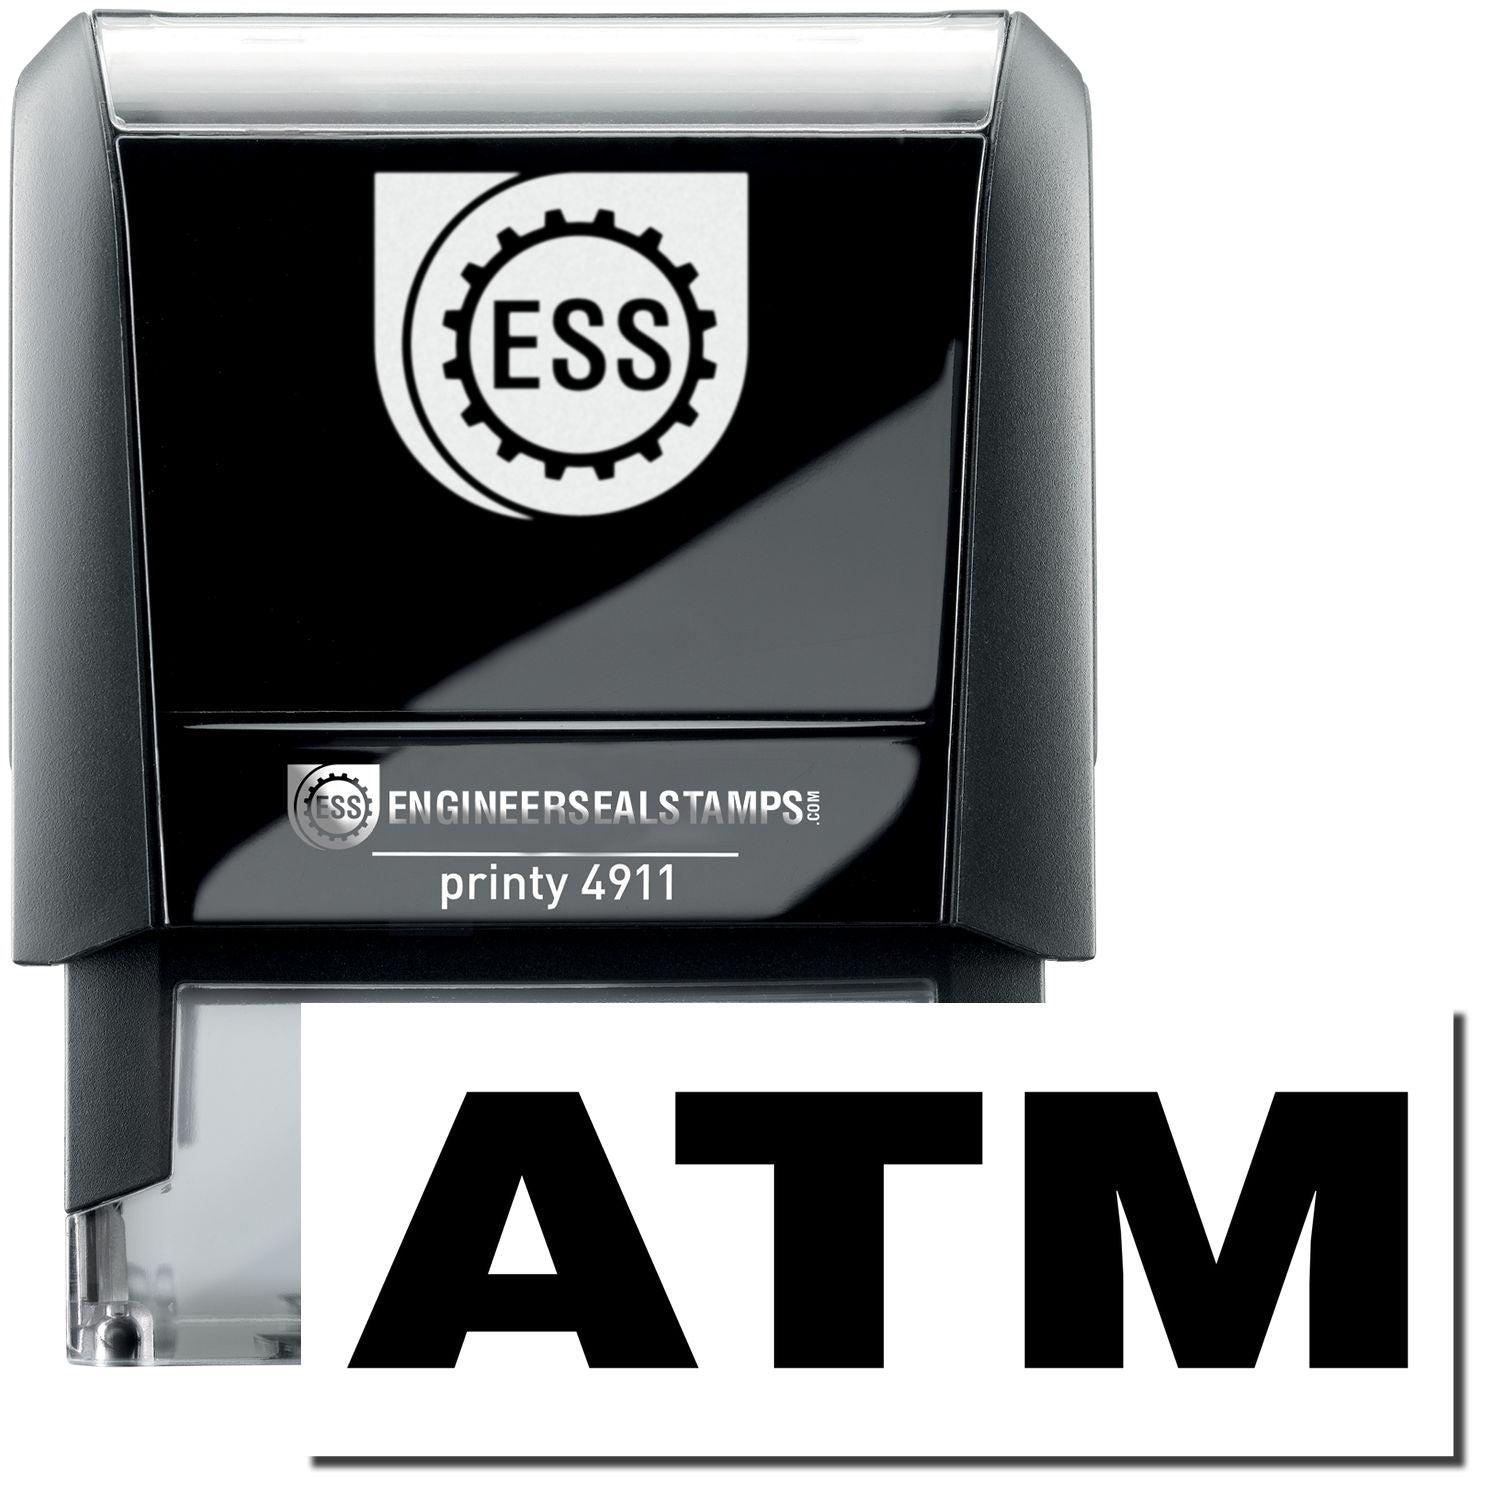 A self-inking stamp with a stamped image showing how the text "ATM" is displayed after stamping.